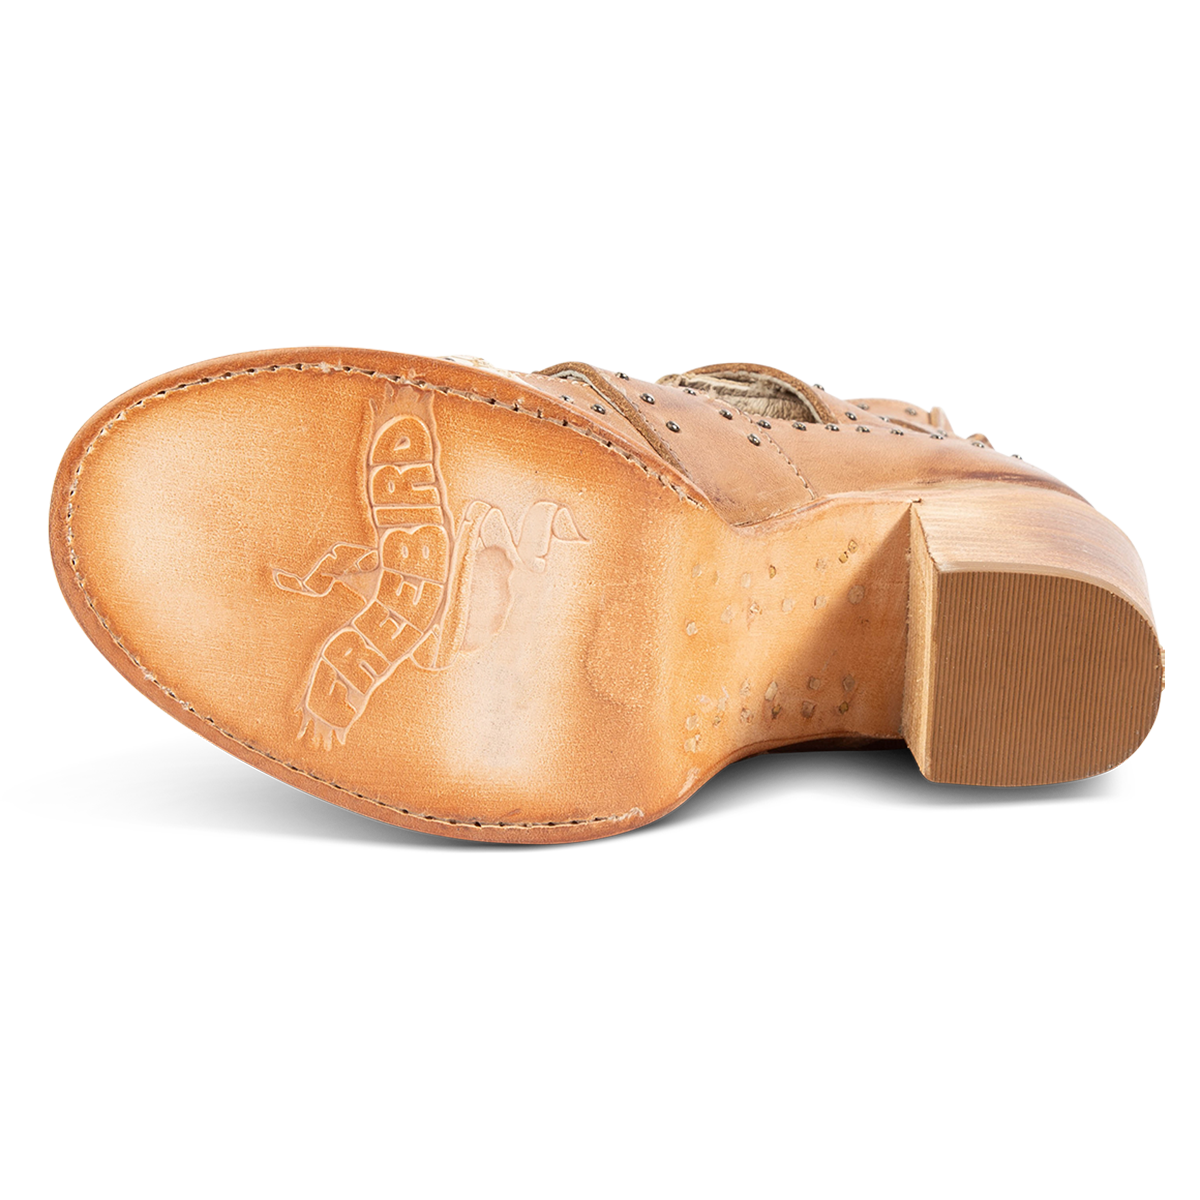 Leather sole imprinted with FREEBIRD on women's Brandy white snake embossed leather sandal 